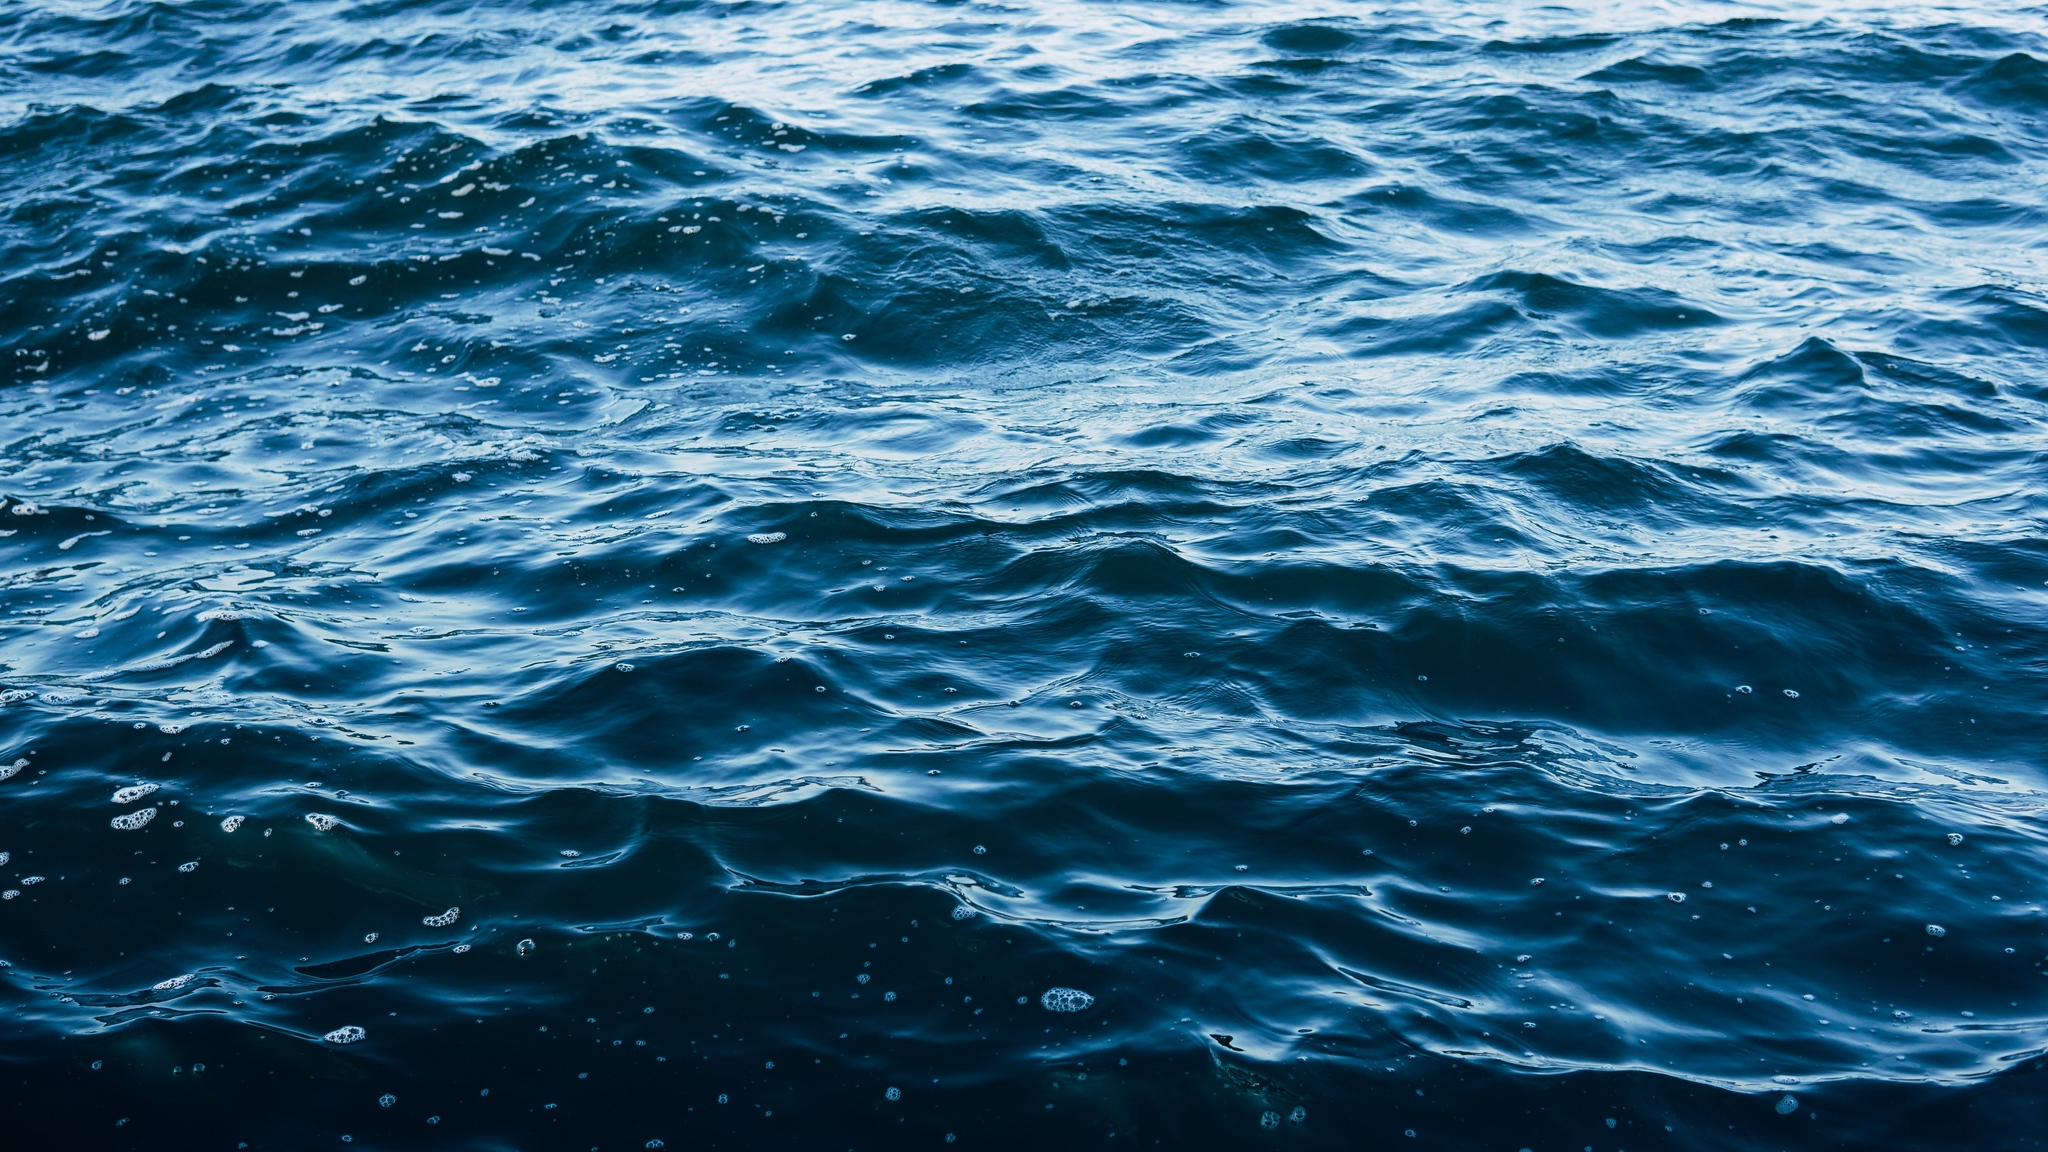 Download wallpaper 2048x1152 sea, water, surface, waves